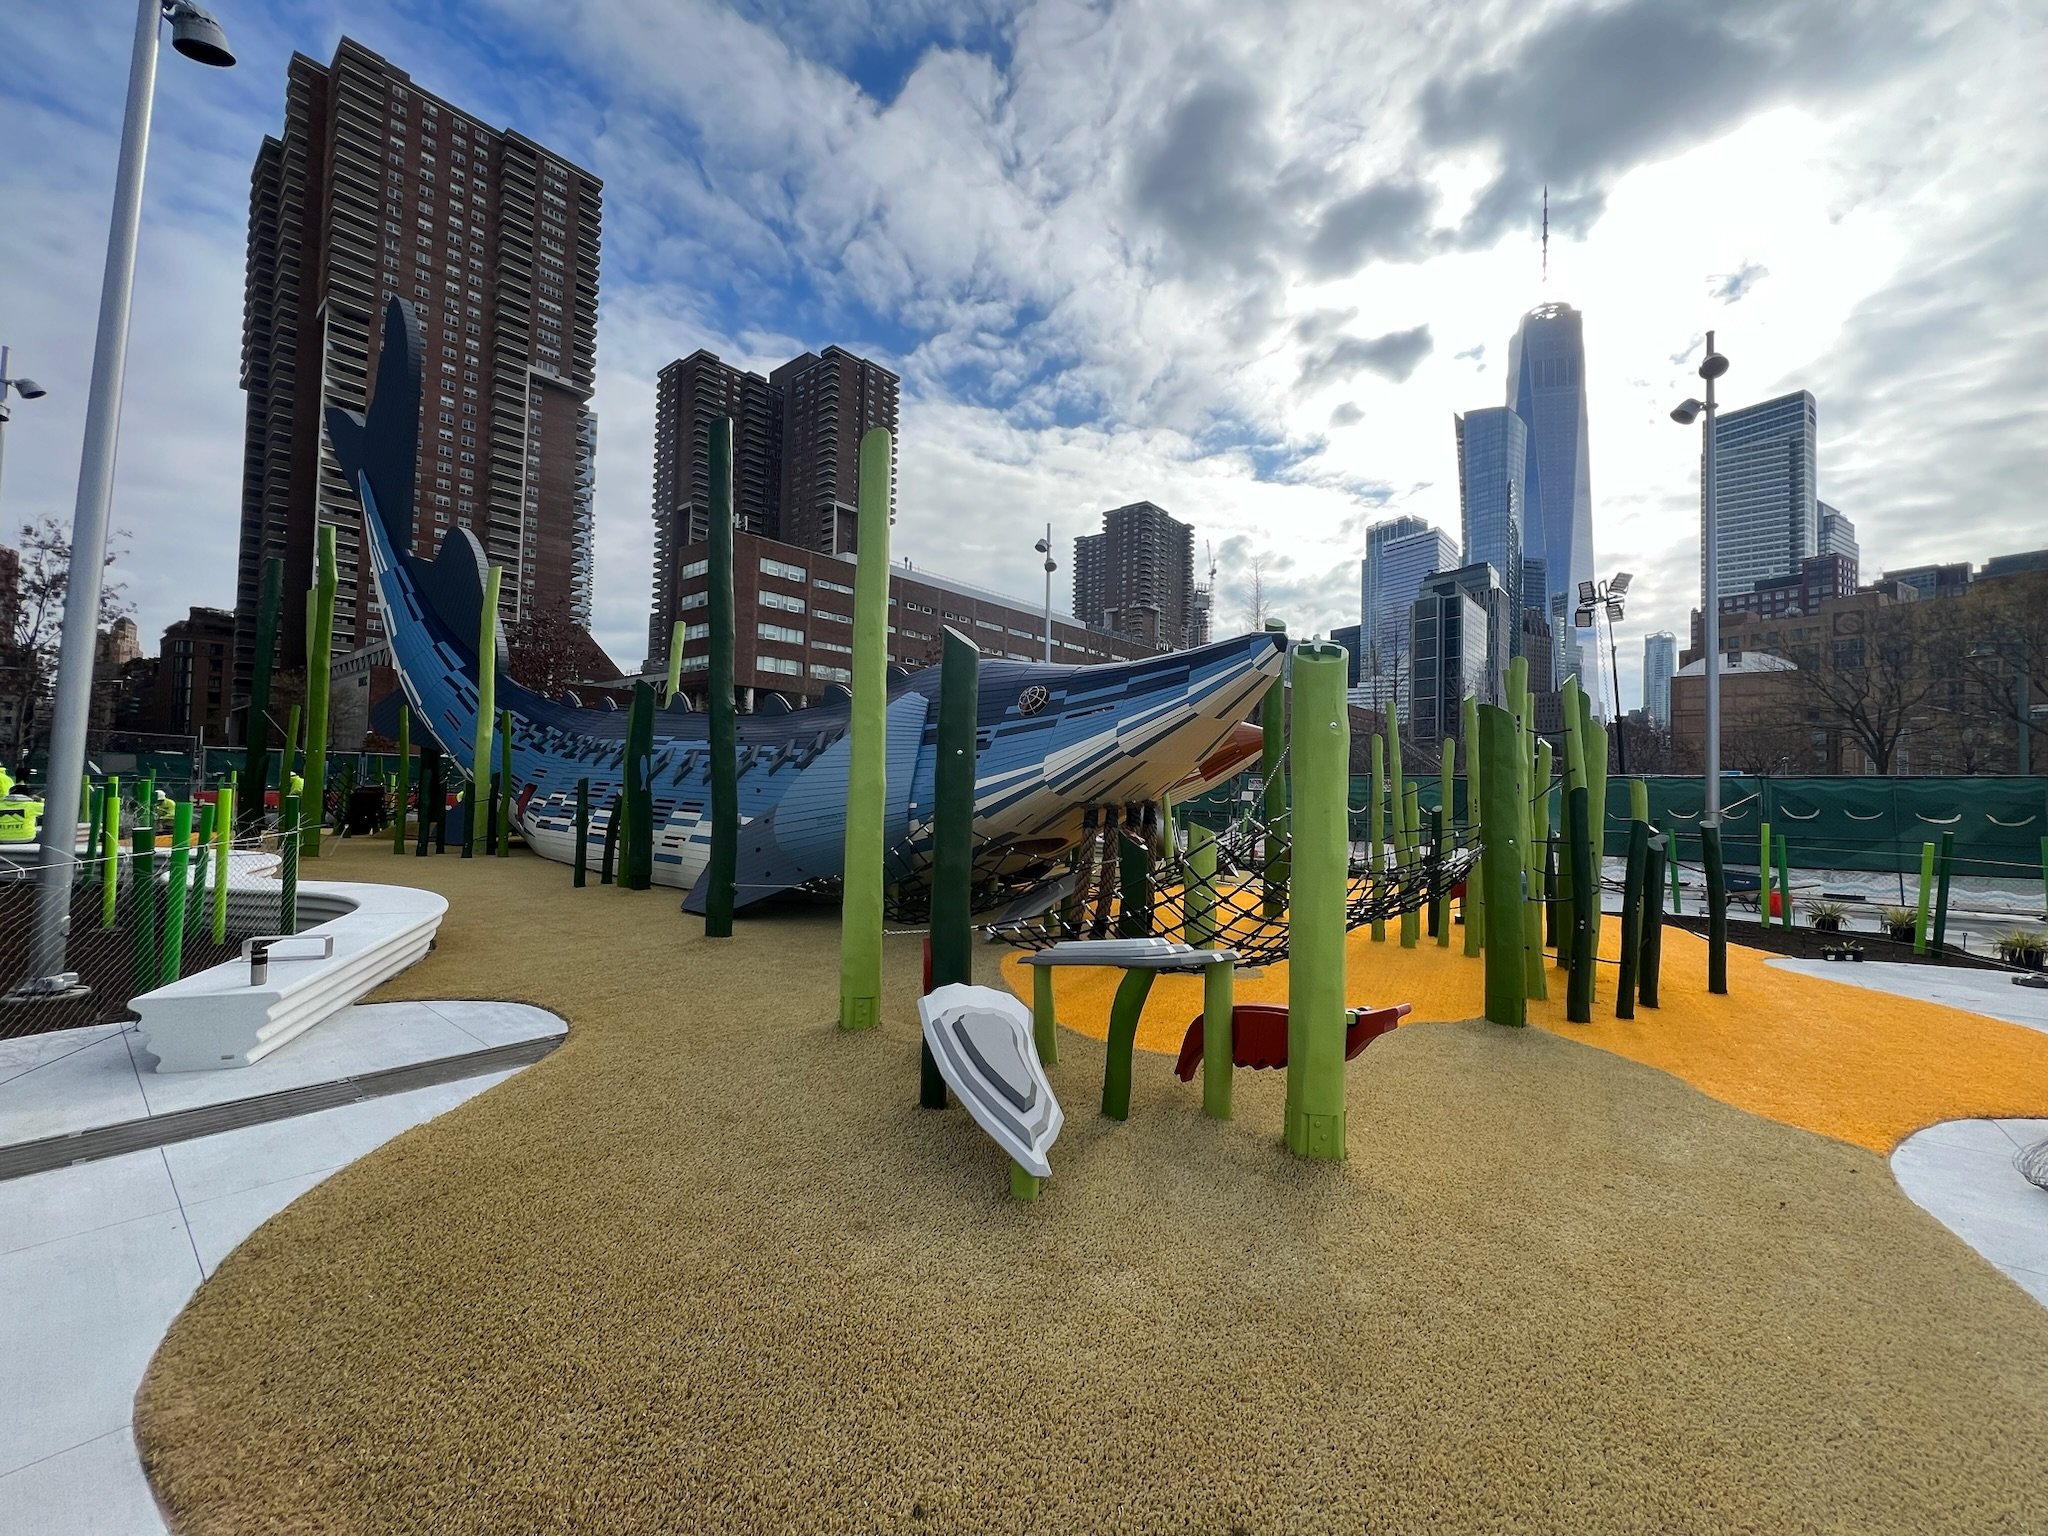 an image of artificial grass in New York City at a playground